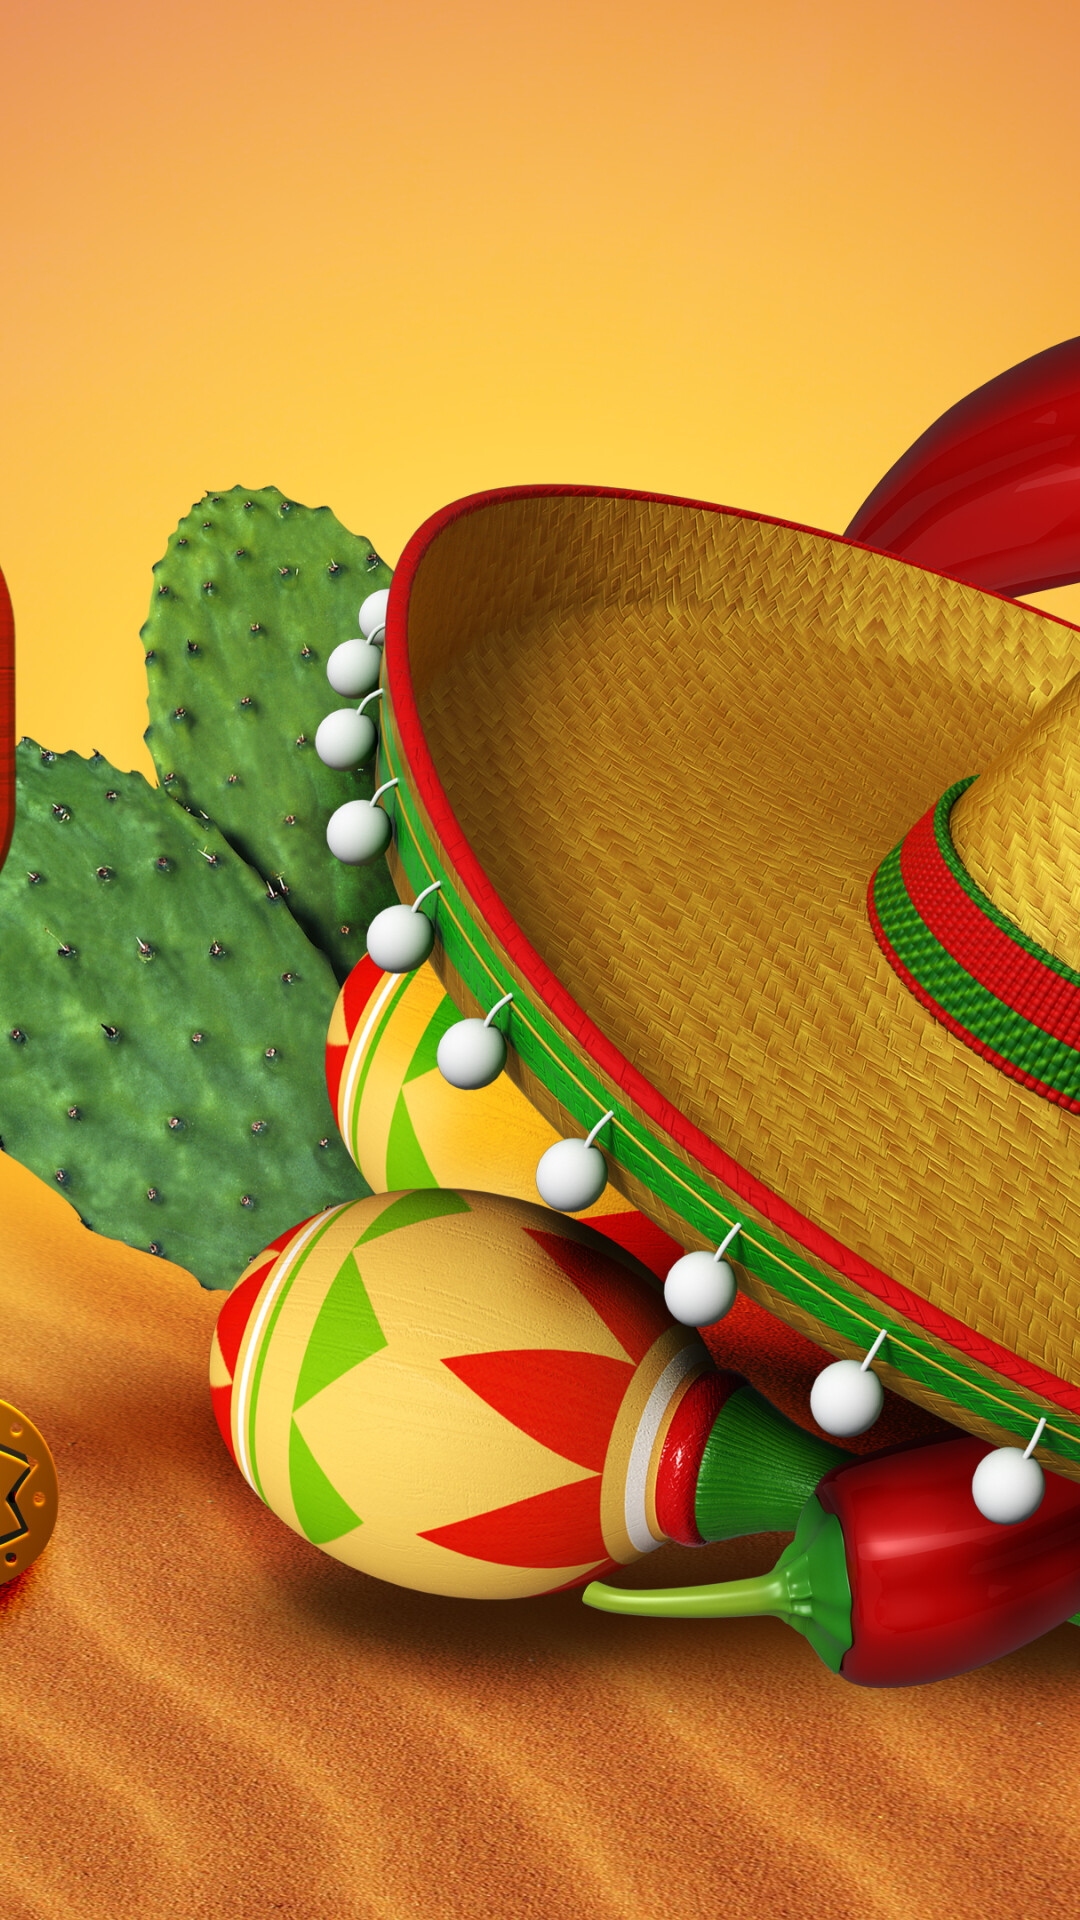 Mexican Fiesta: A day for Mexican Americans to celebrate their heritage. 1080x1920 Full HD Background.